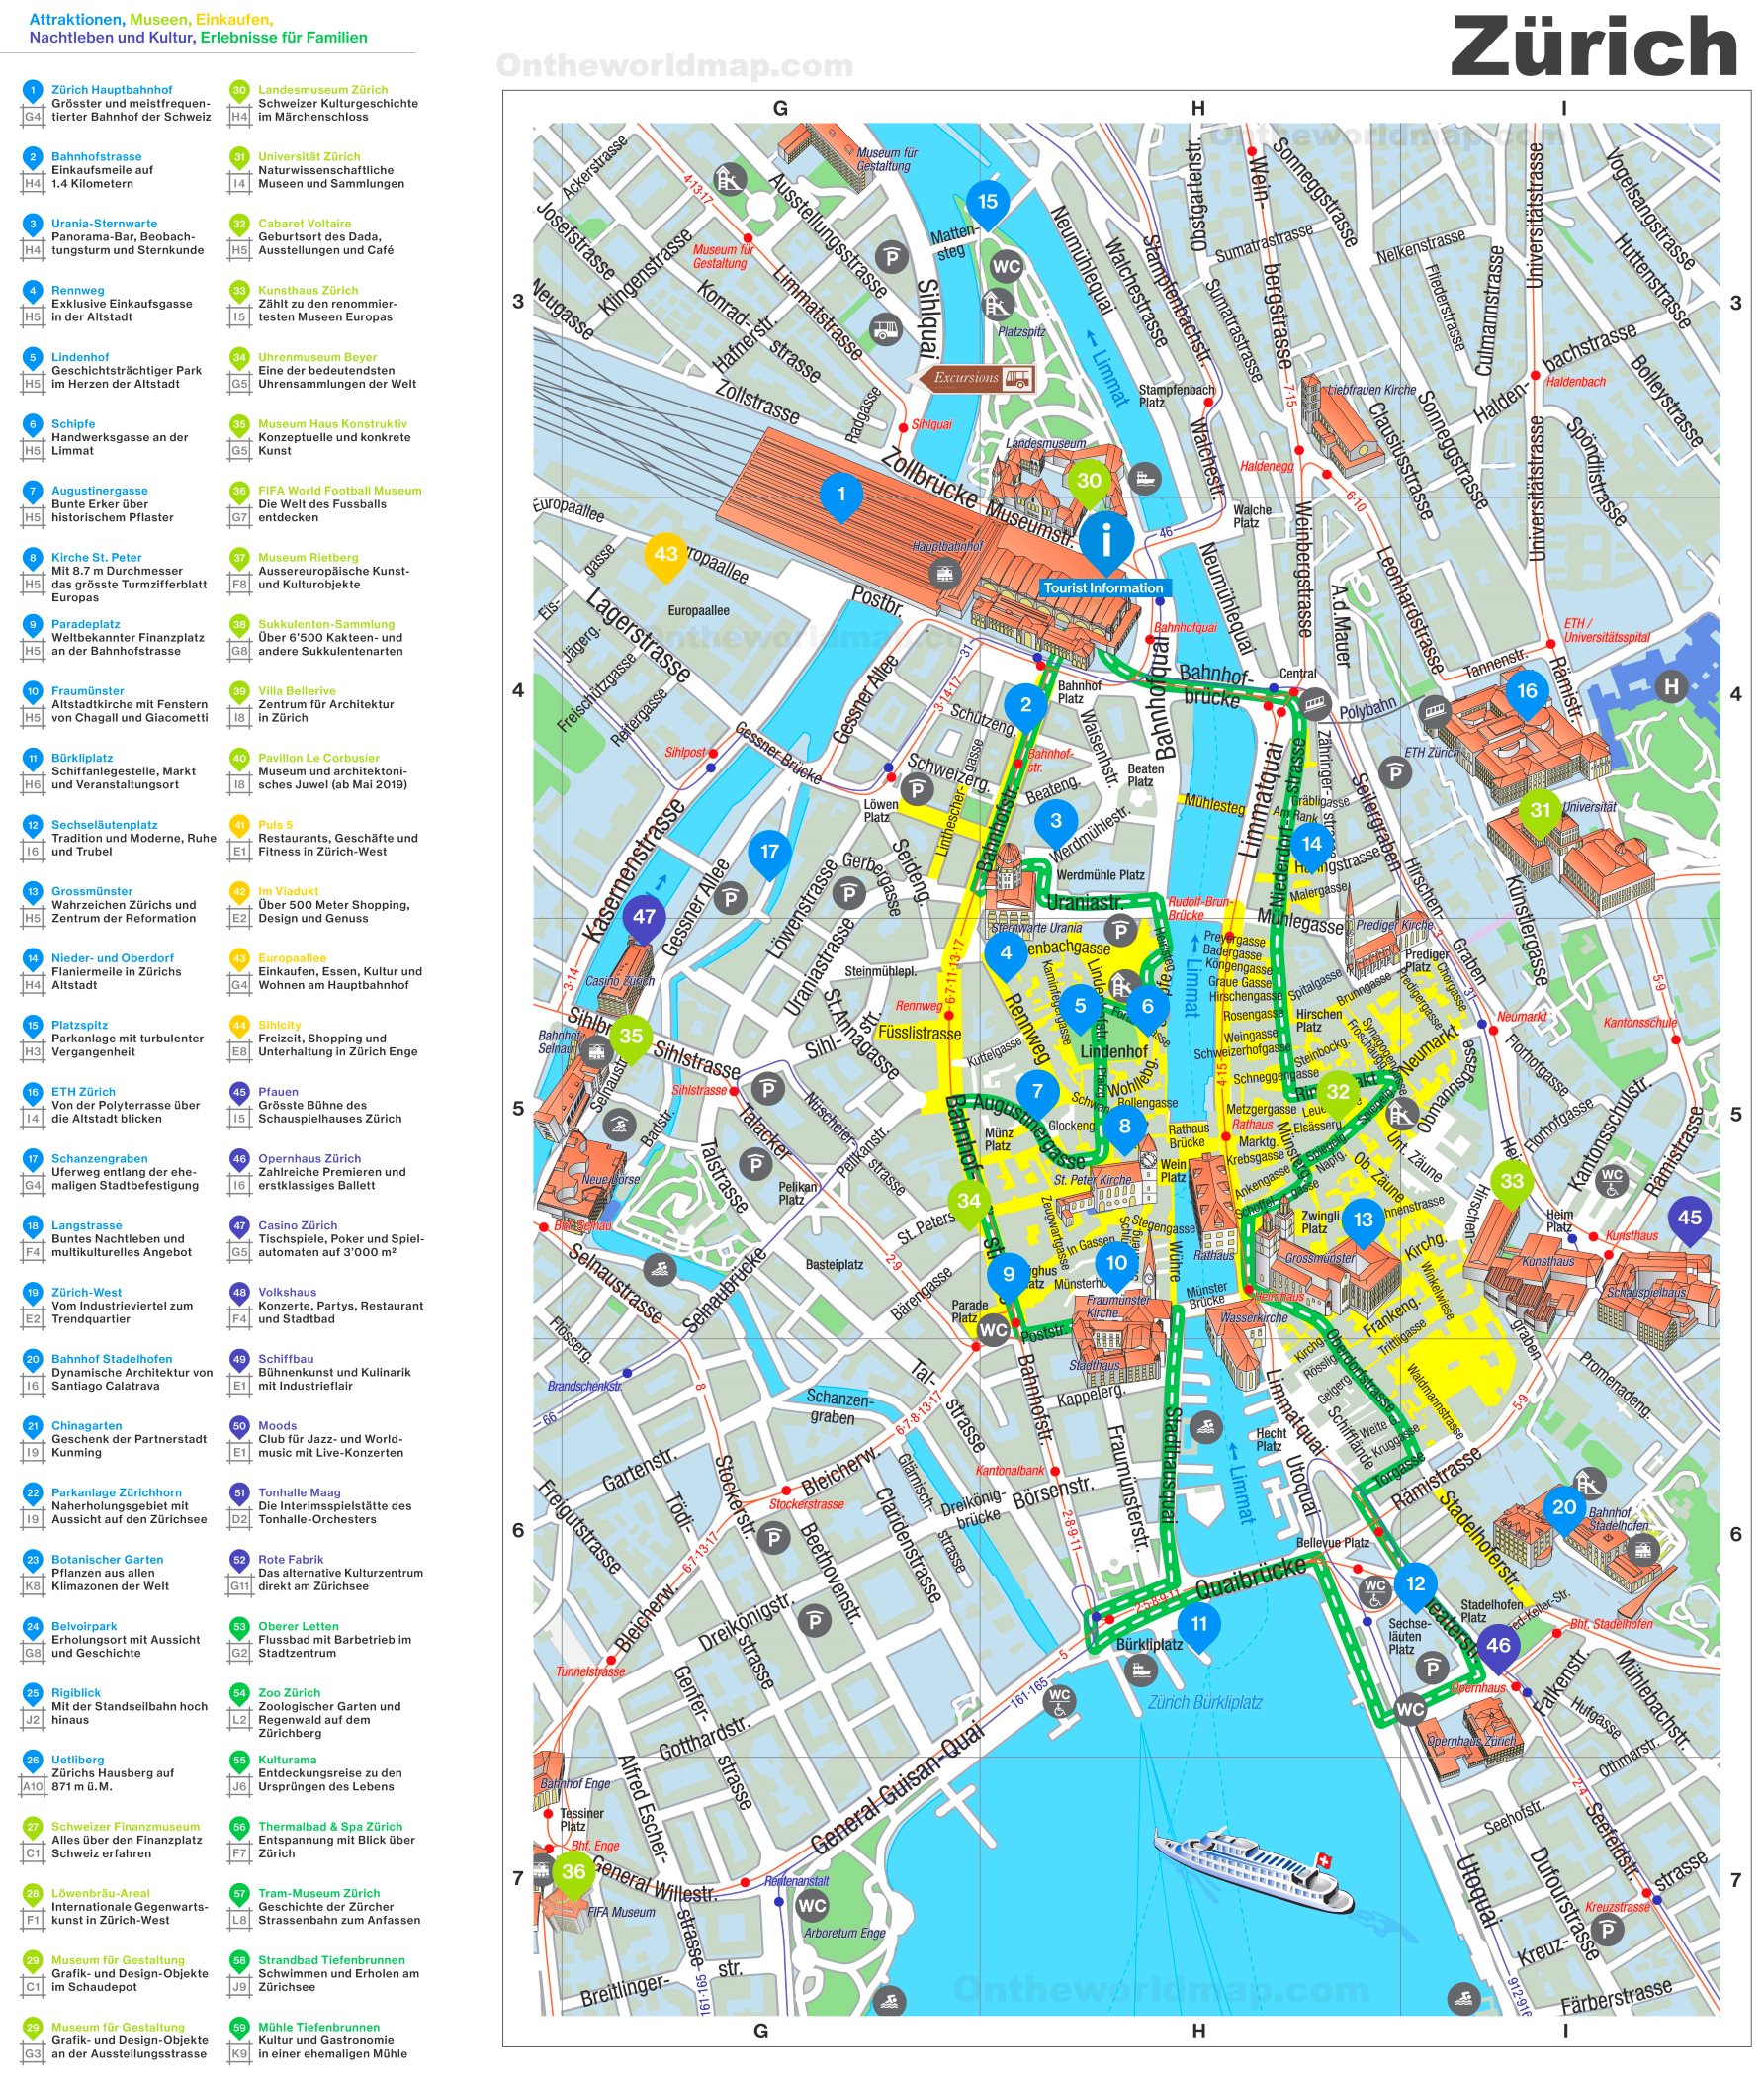 Free Zurich city map with sights to download